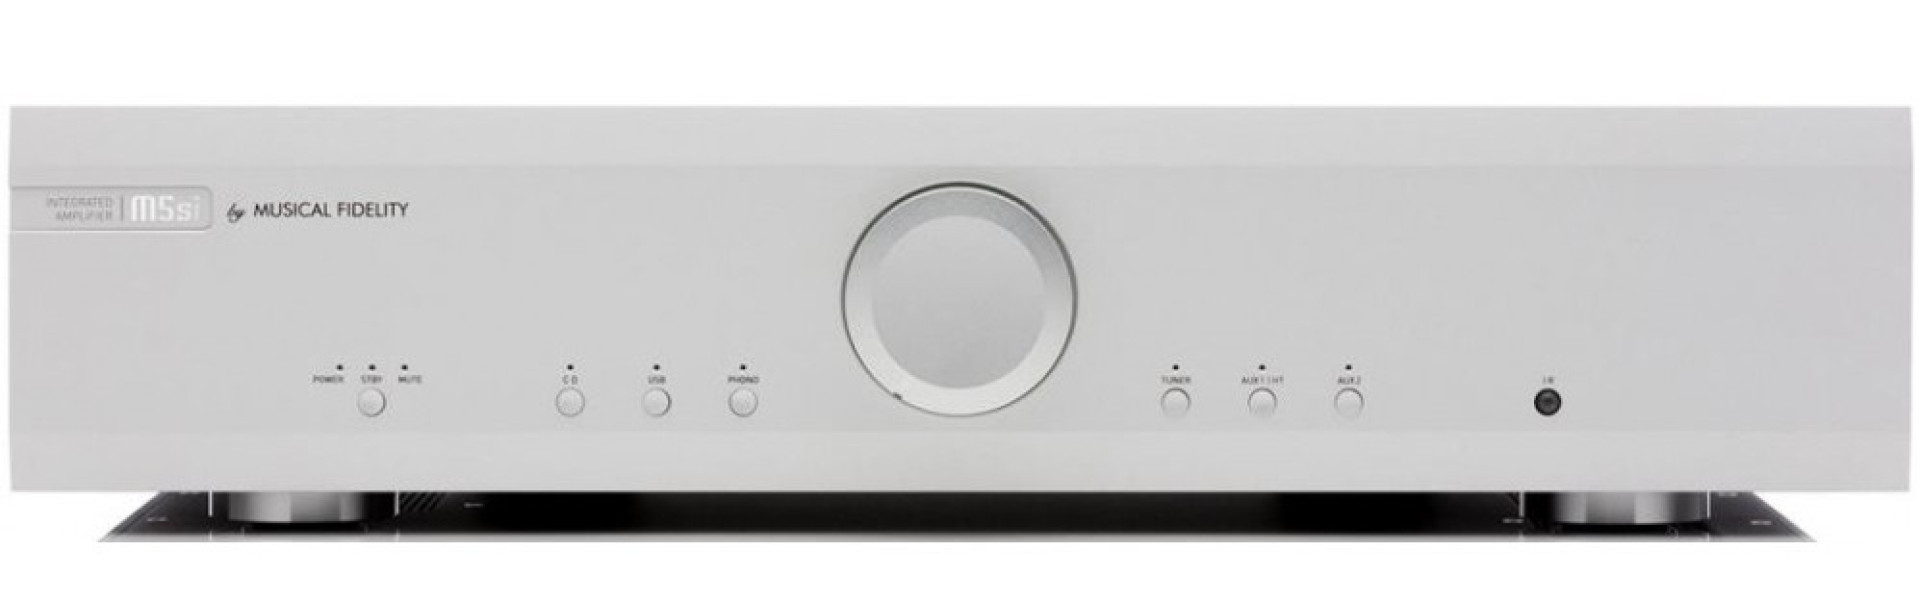 Musical Fidelity M5si - silver